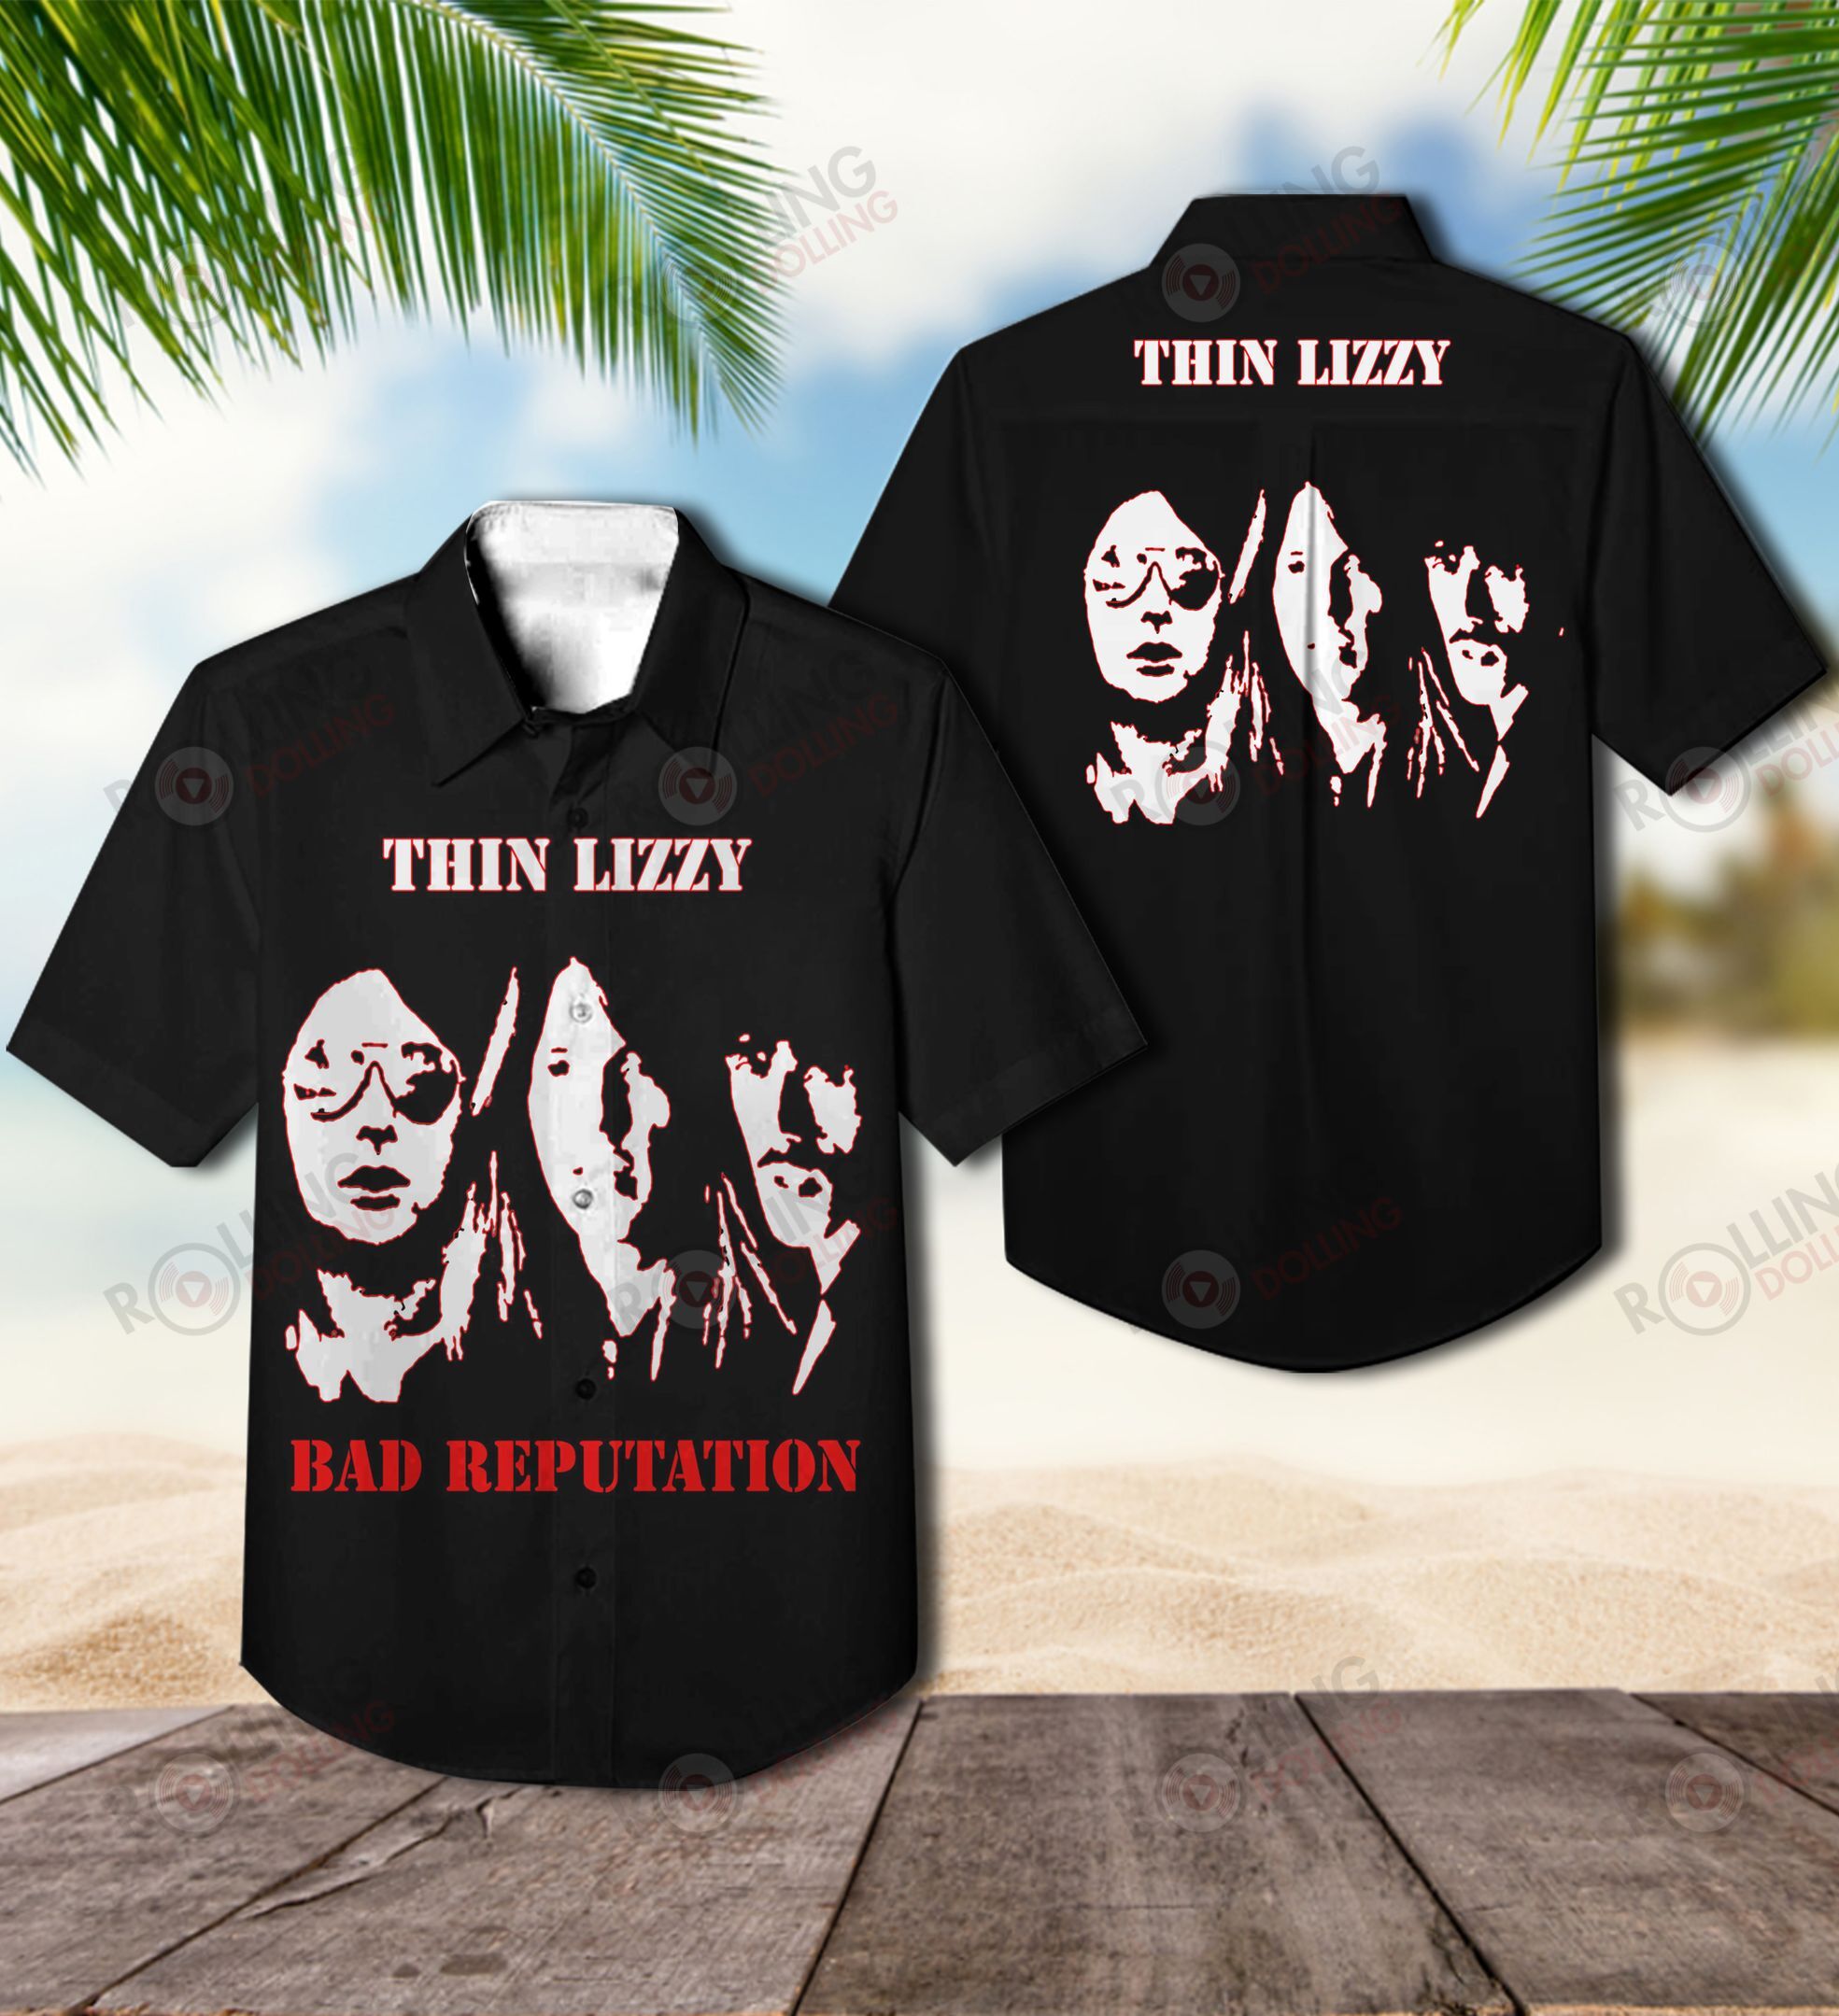 This would make a great gift for any fan who loves Hawaiian Shirt as well as Rock band 103